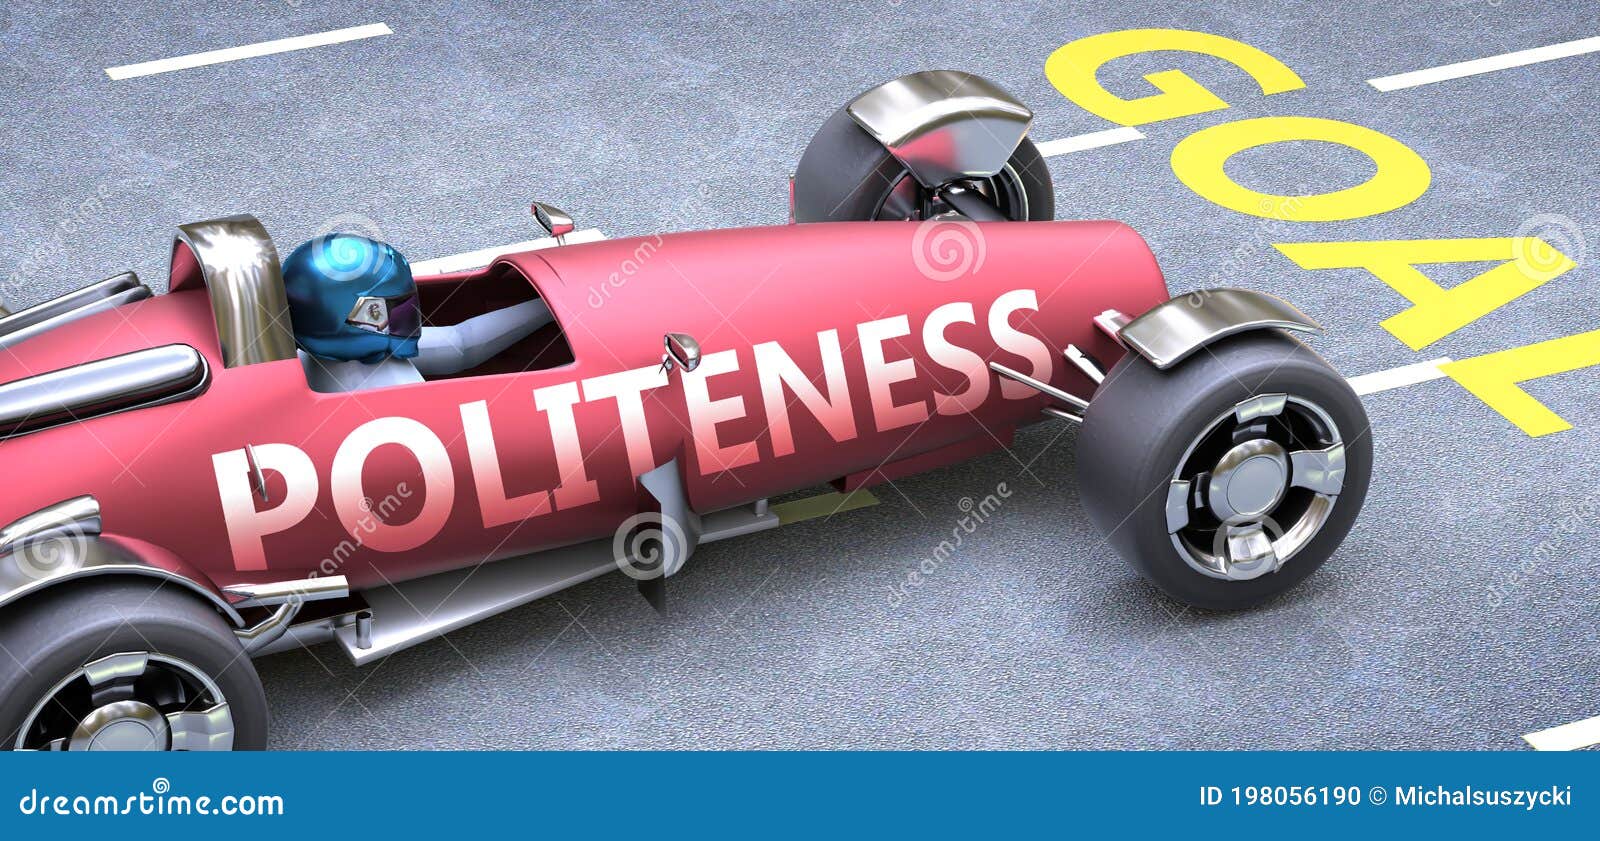 politeness helps reaching goals, pictured as a race car with a phrase politeness on a track as a metaphor of politeness playing